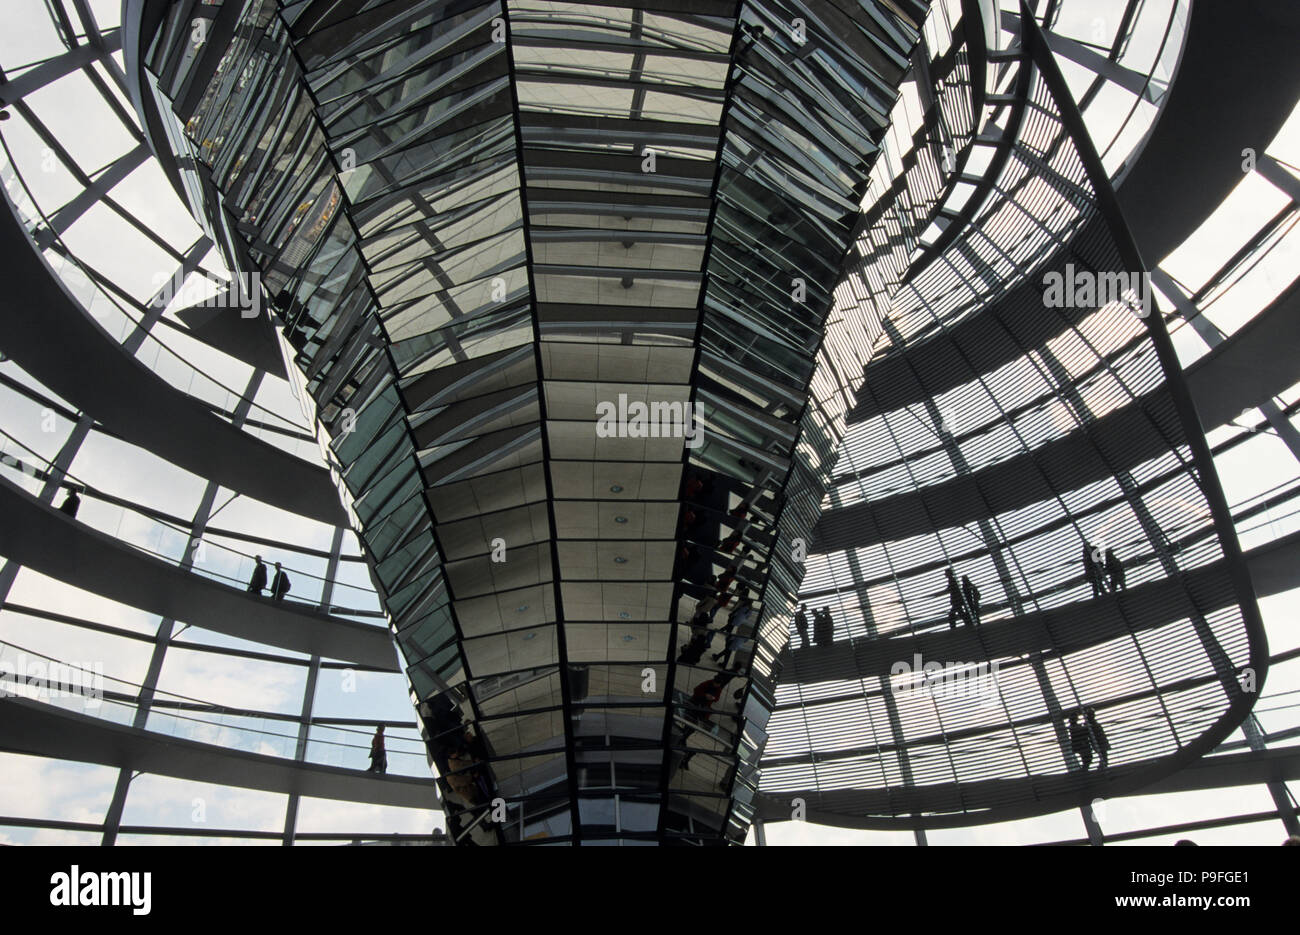 GERMANY, Berlin, Reichstag building today seat of german parliament Bundestag with glass dome with skywalk designed by architect Sir Norman Foster Stock Photo